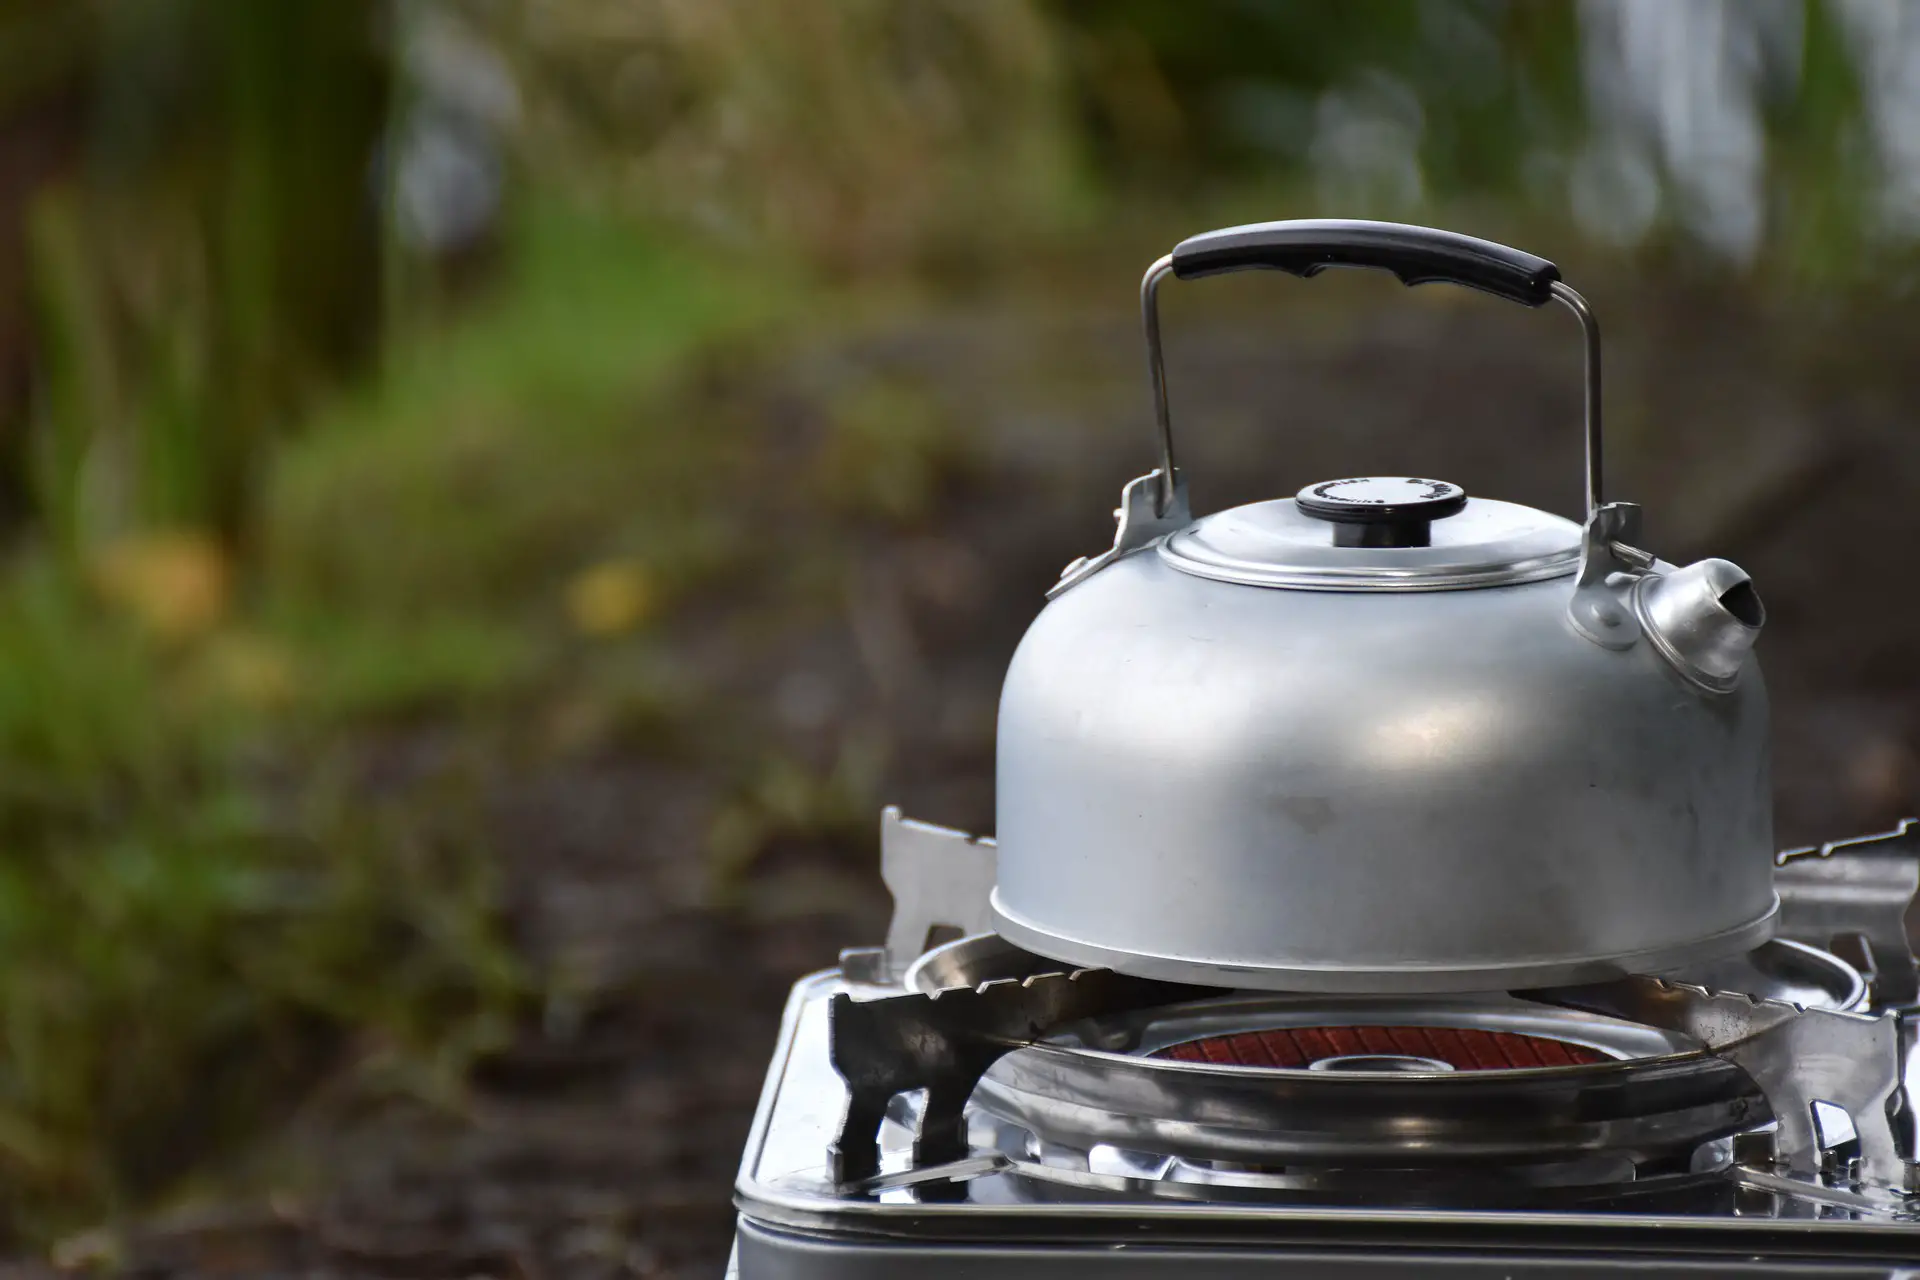 Are Camping Stoves Safe?